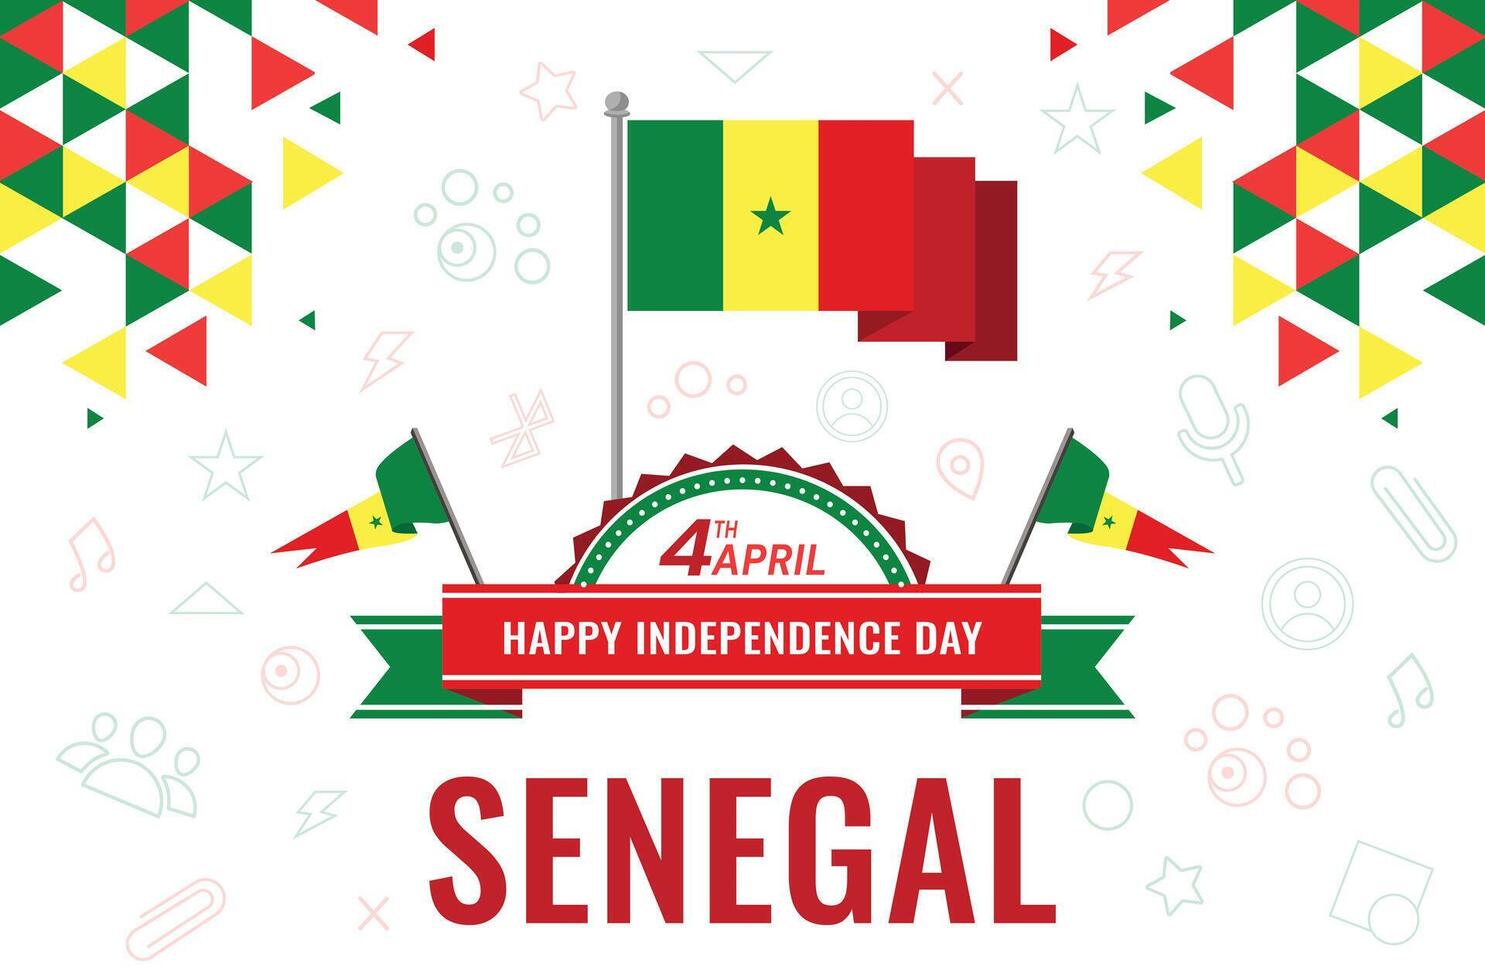 National day of Senegal vector illustration. Independence day of Senegal. Suitable for greeting card, poster and banner.